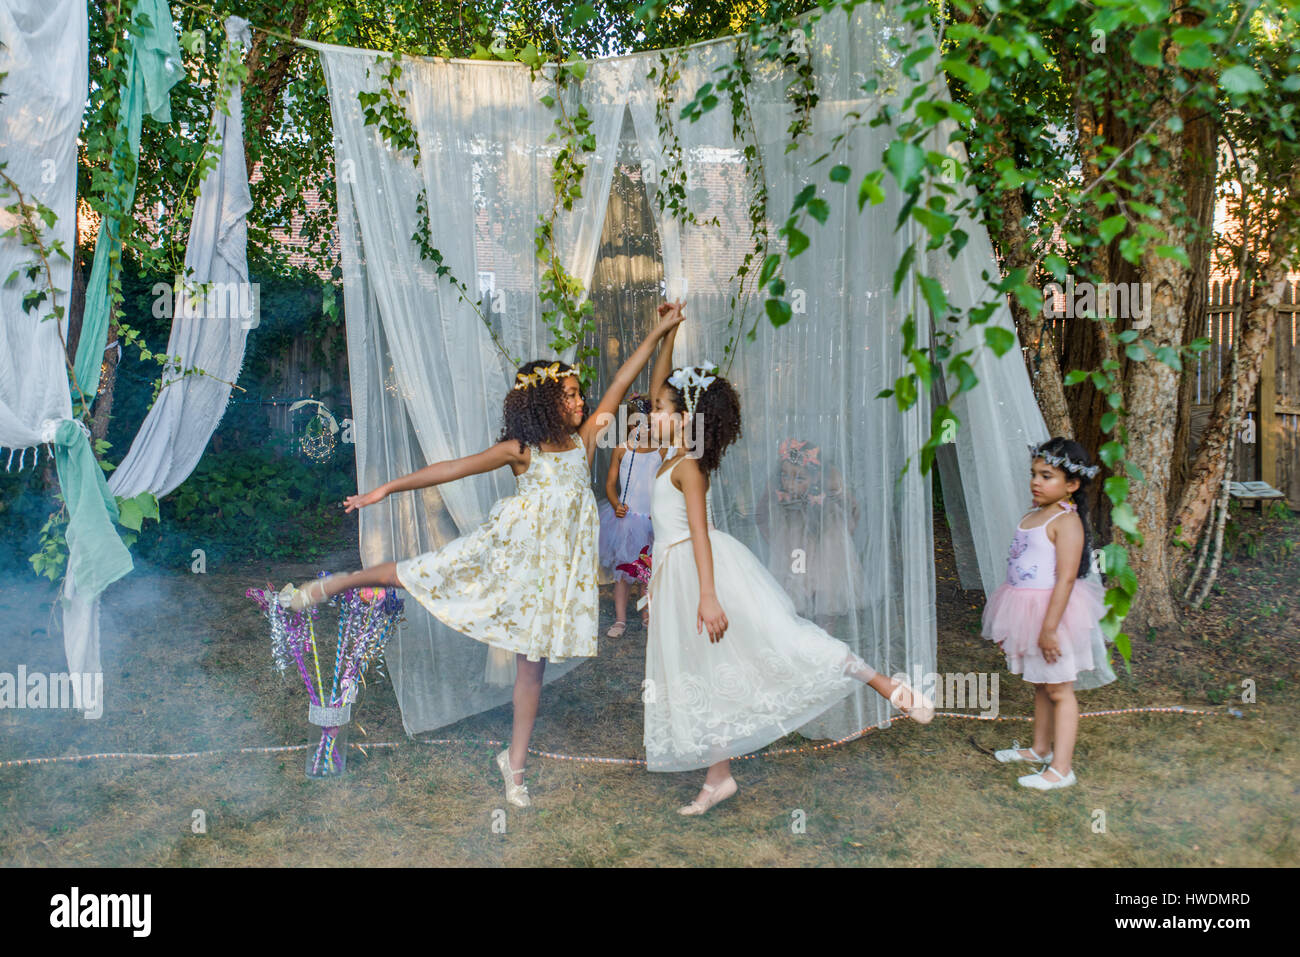 Two young girls, dressed as fairies, dancing outdoors, younger girl watching from side Stock Photo